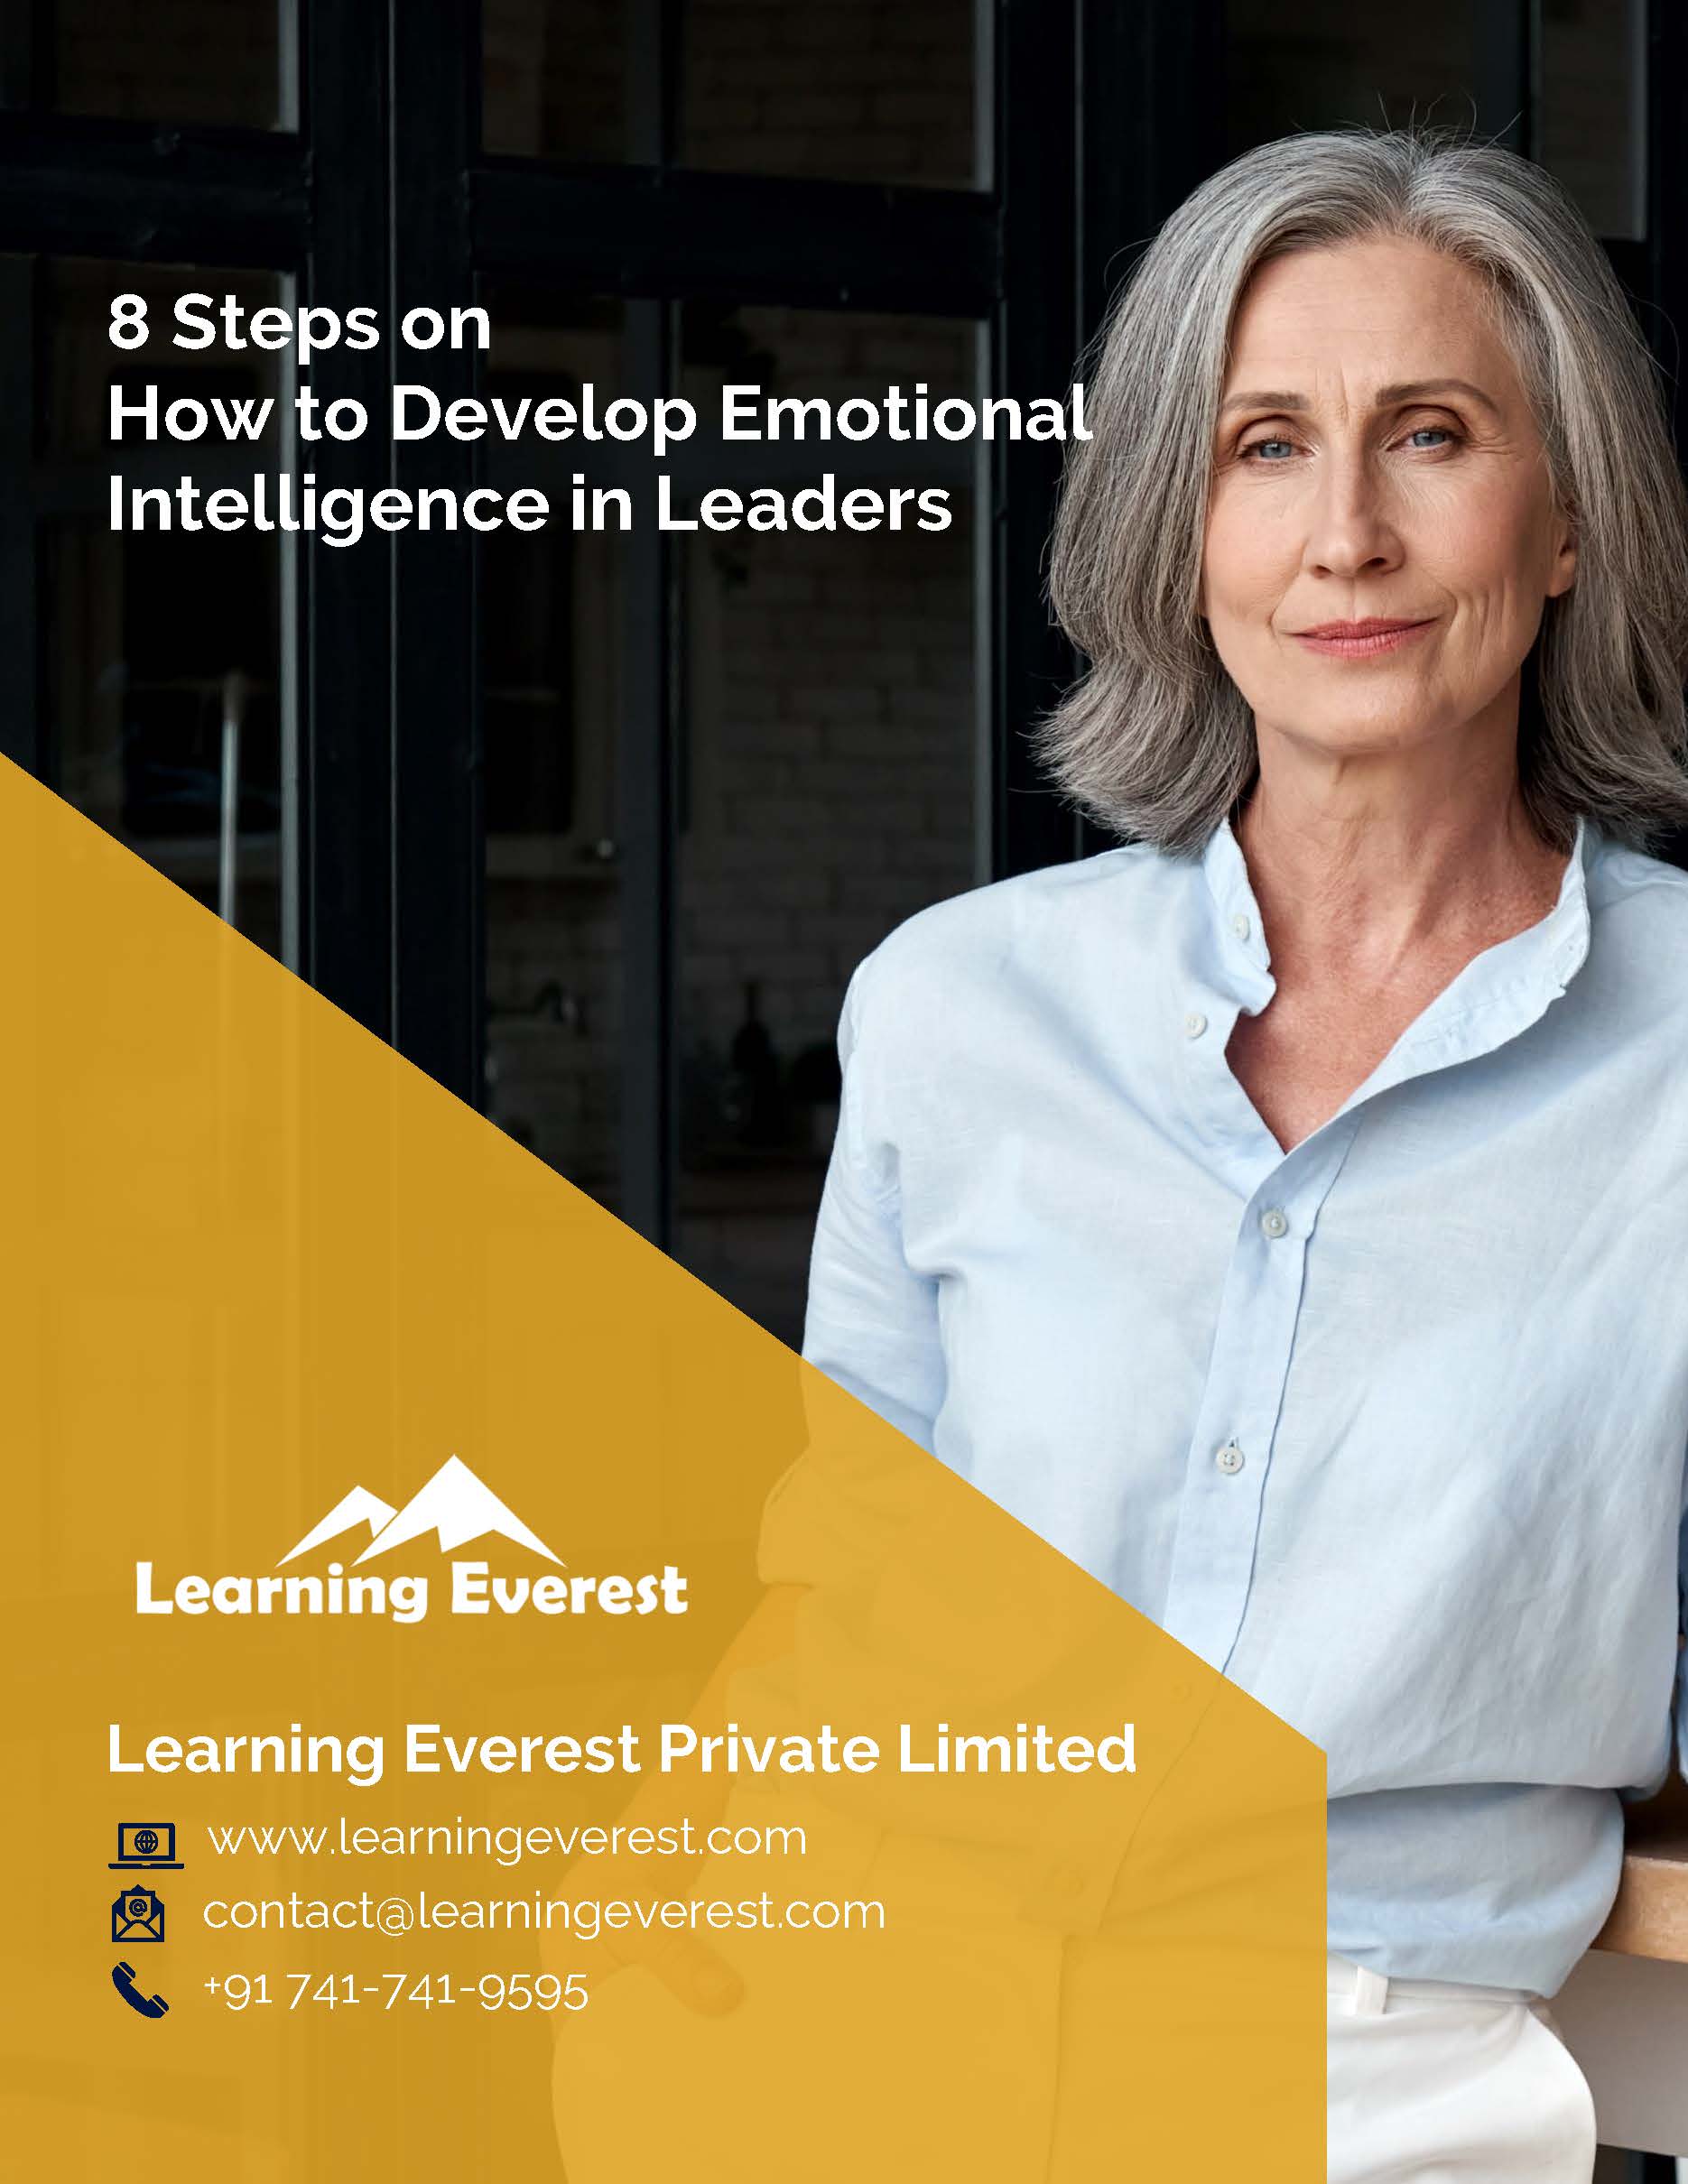 8 Steps on How to Develop Emotional Intelligence in Leaders